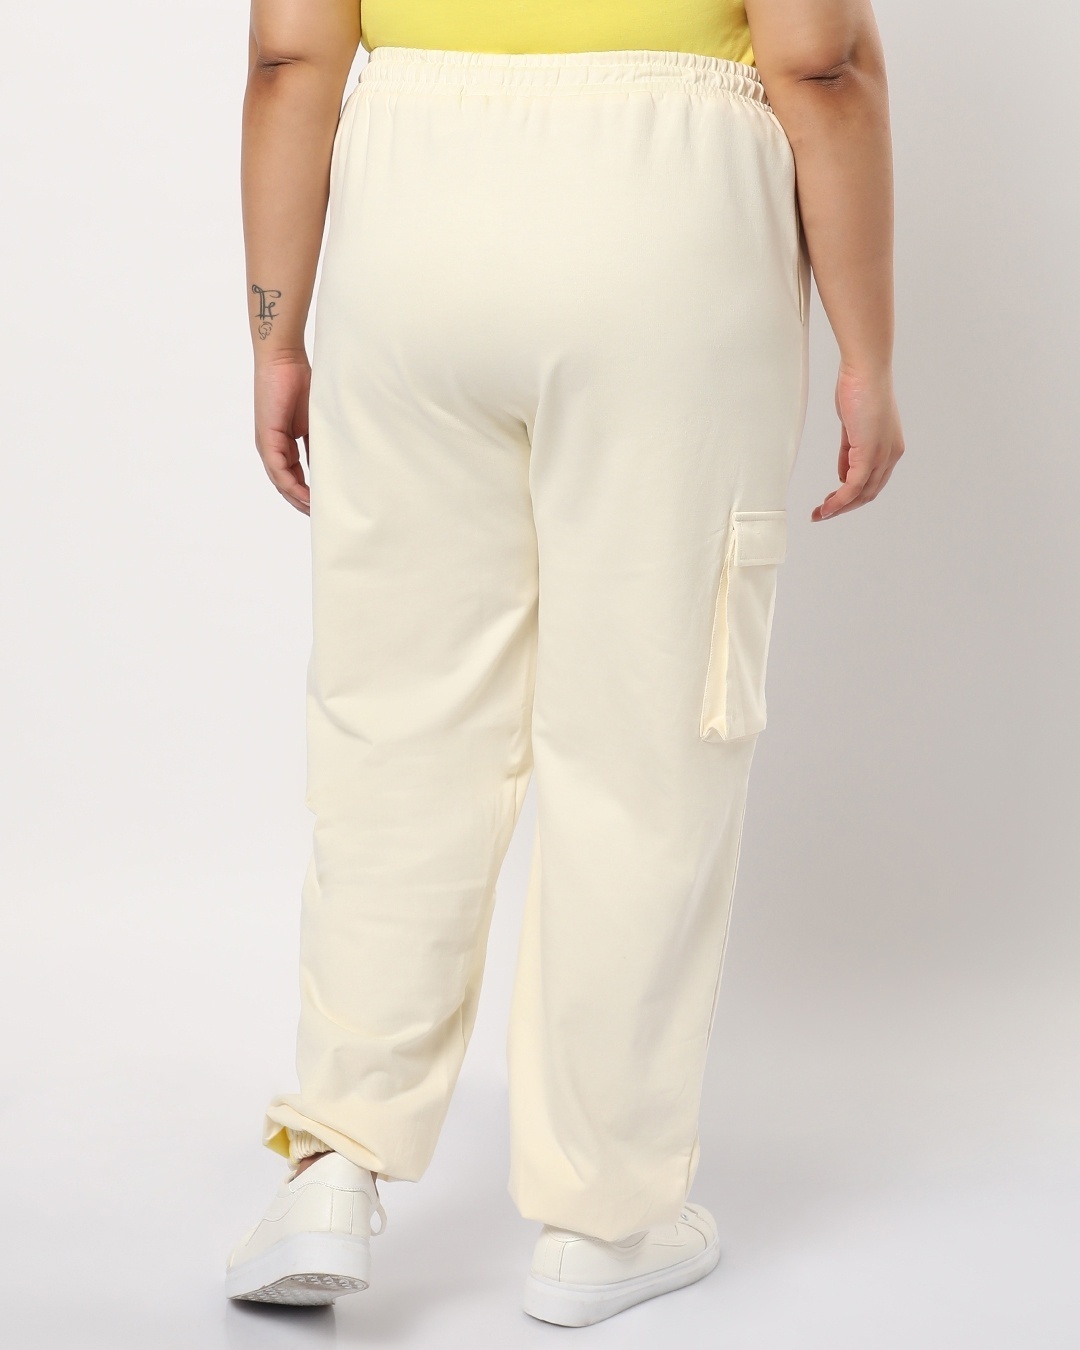 Shop Women's Birthday Yellow and White Plus Size Color Block Joggers-Design